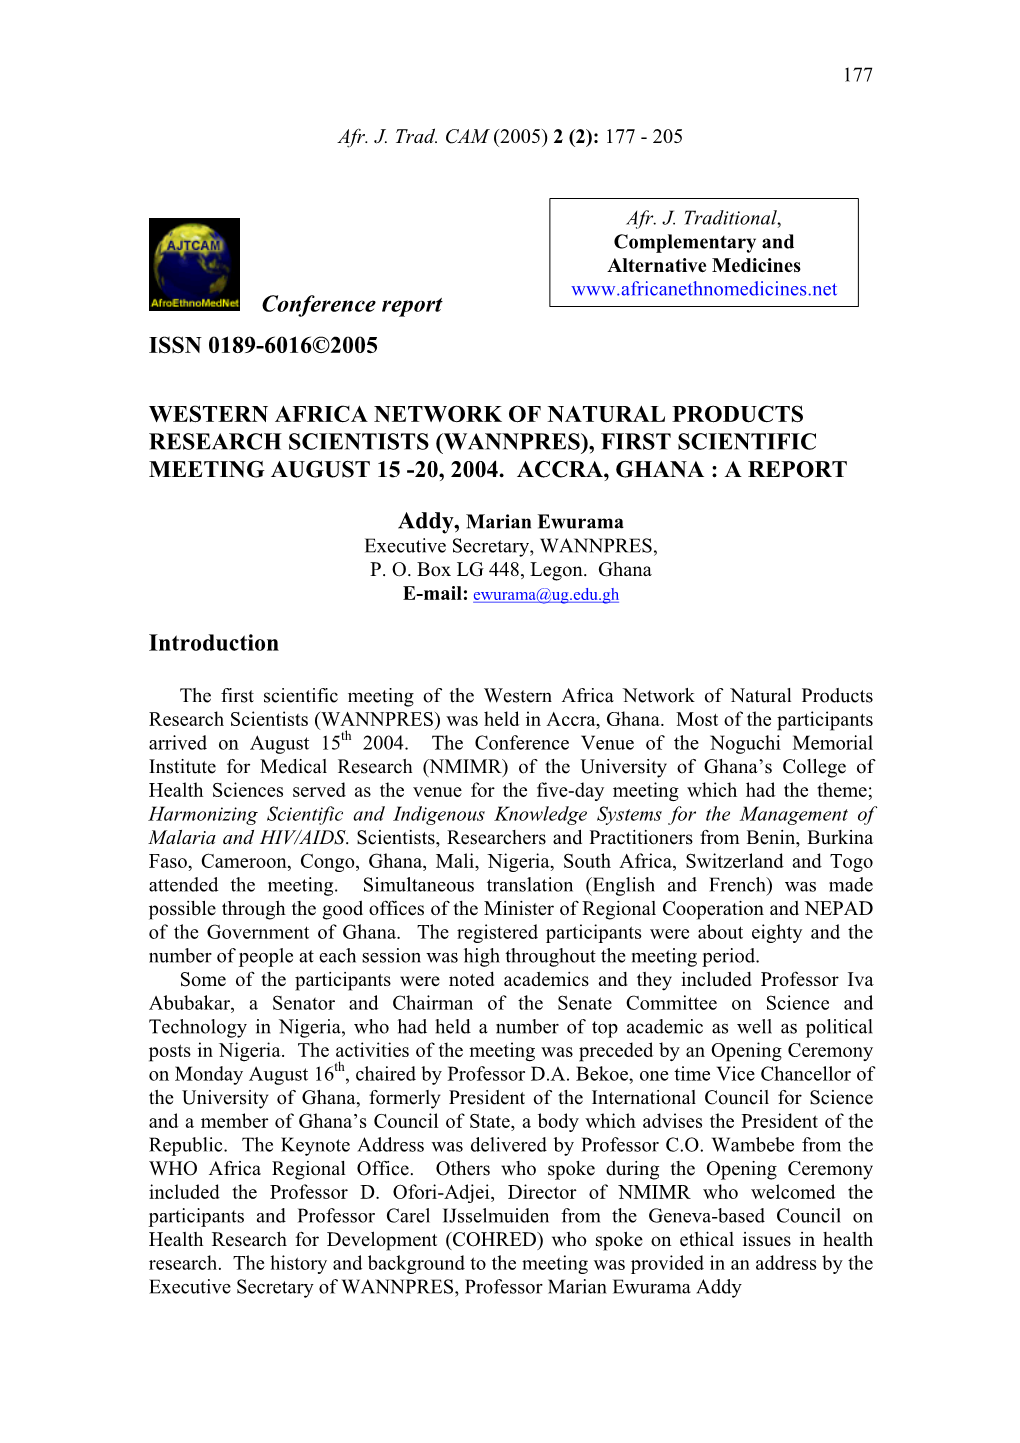 Western Africa Network of Natural Products Research Scientists (Wannpres), First Scientific Meeting August 15 -20, 2004